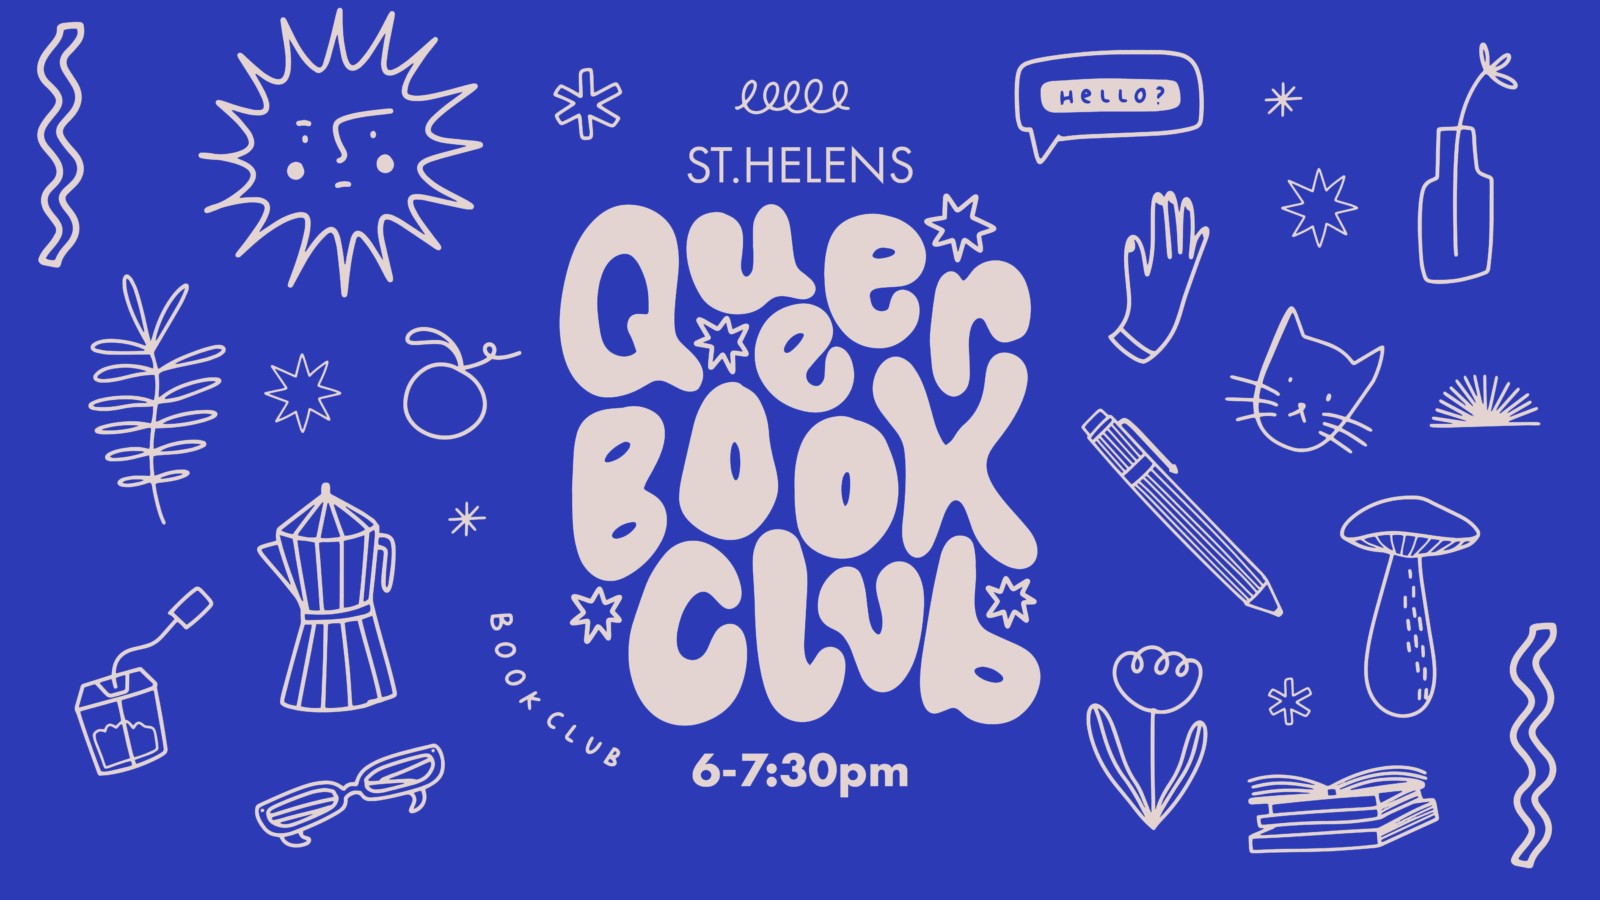 An illustration with a dark blue background and off white illustrated text that reads 'Queer Book Club'. Around the title are lots of different doodles filling the background, including plants, books, a mushroom, a pen and a cafetière.